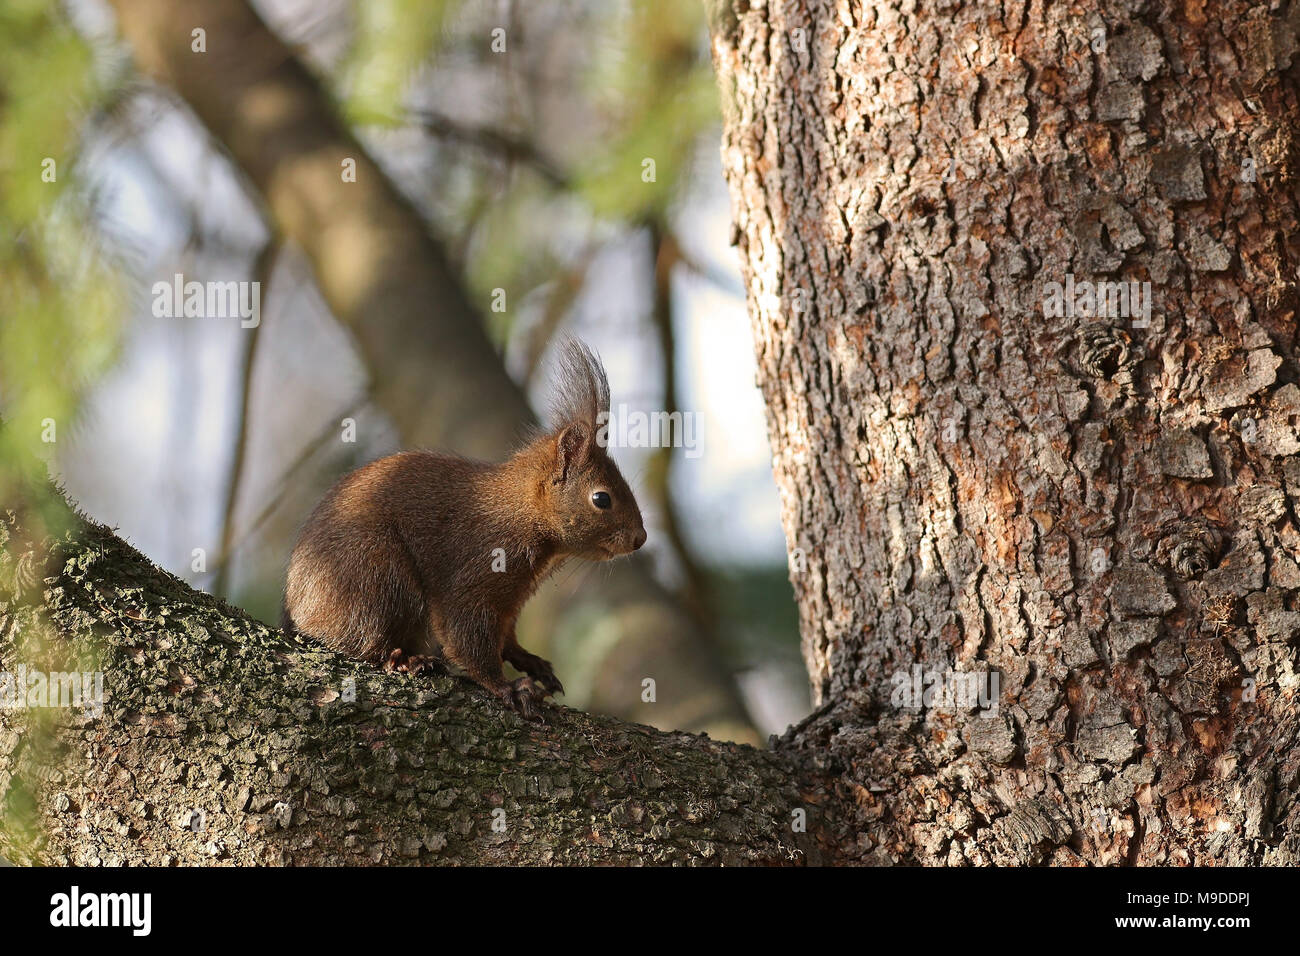 Red squirrel hidden on a tree branch enjoying the spring sun Stock Photo